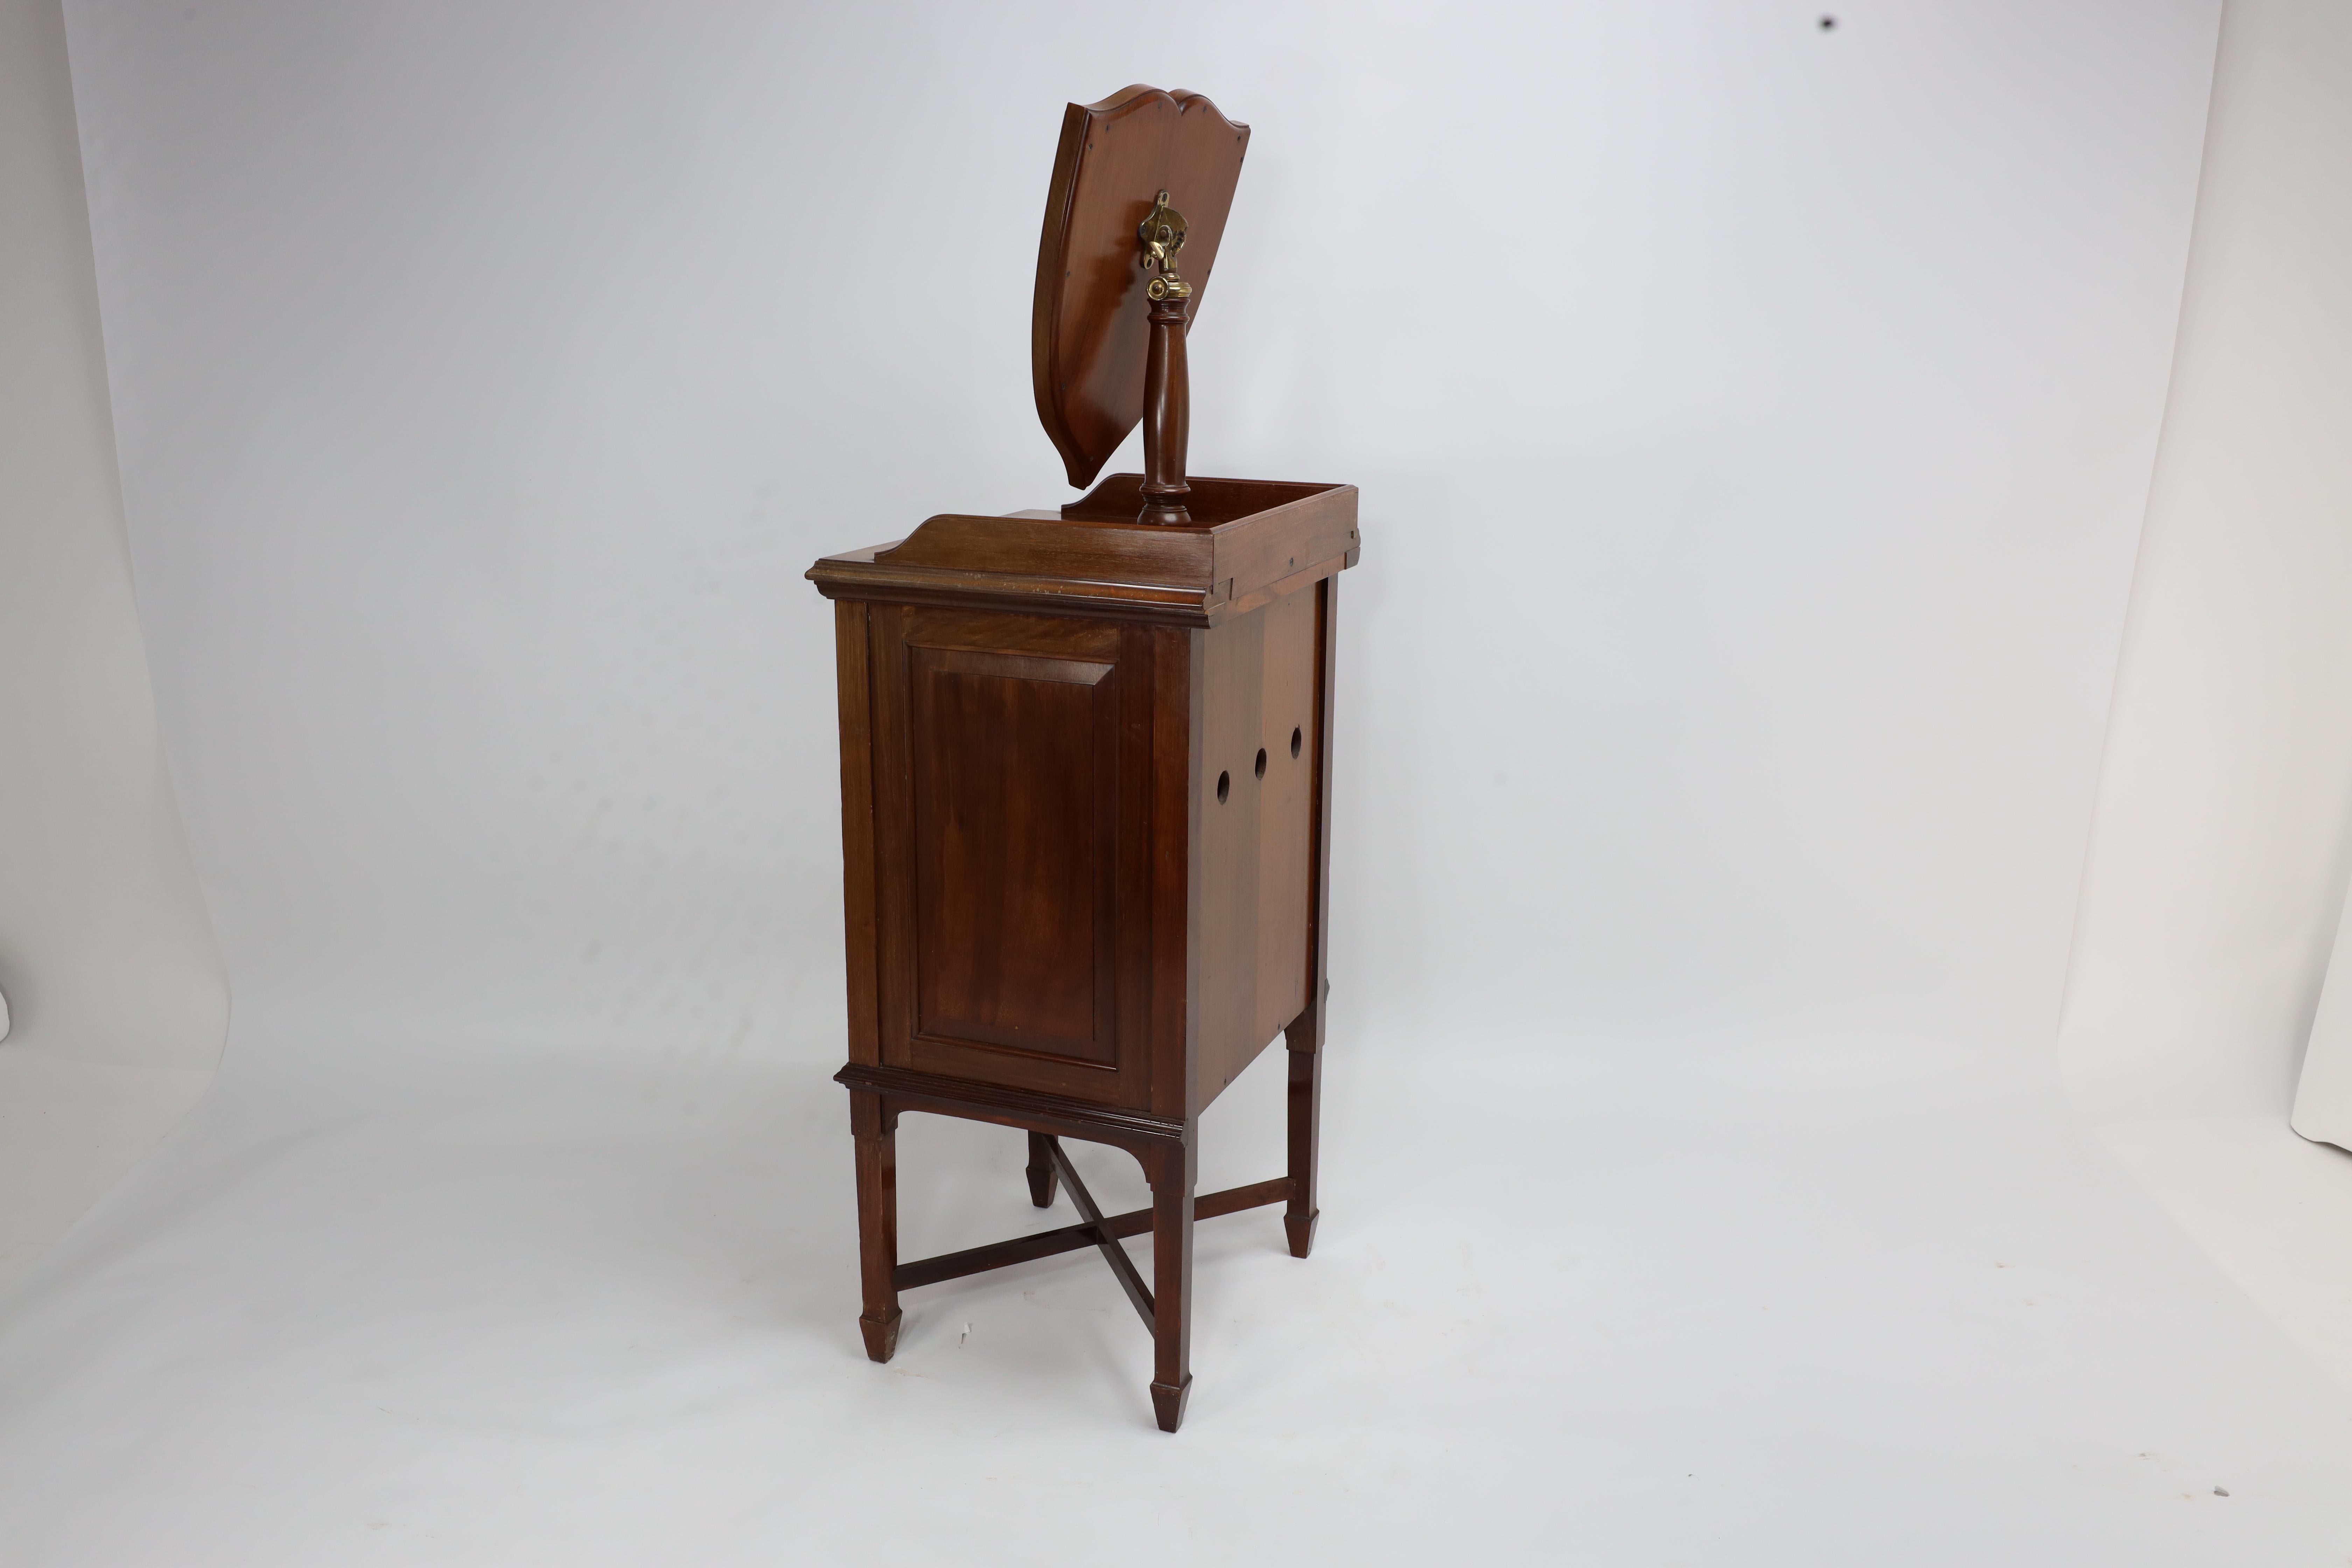 Late 19th Century Morris and Co. A fine quality Arts & Crafts Walnut wash or shaving stand For Sale